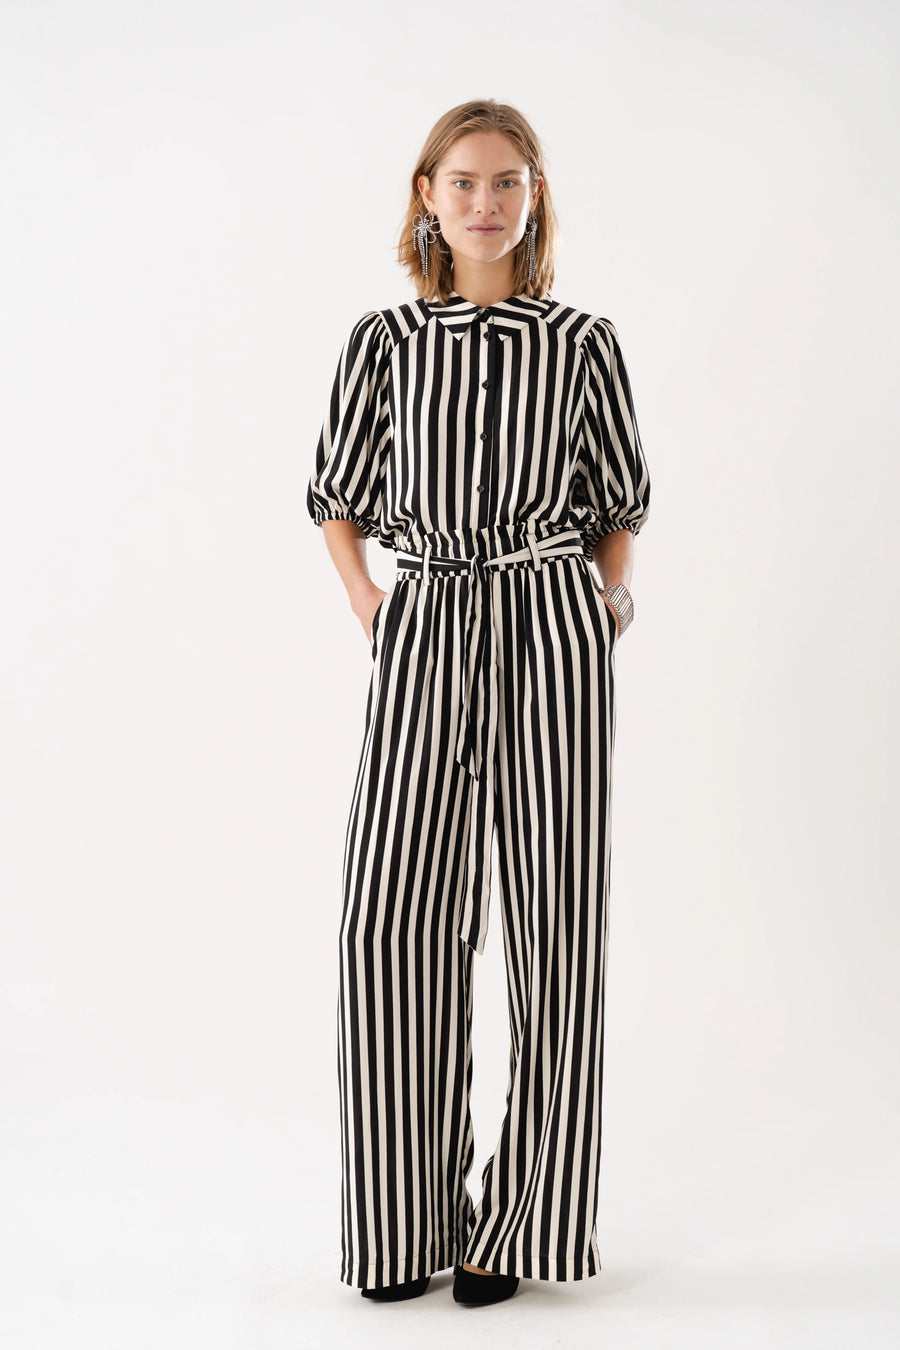 Lollys Laundry Vicky Trousers Black White Stripe